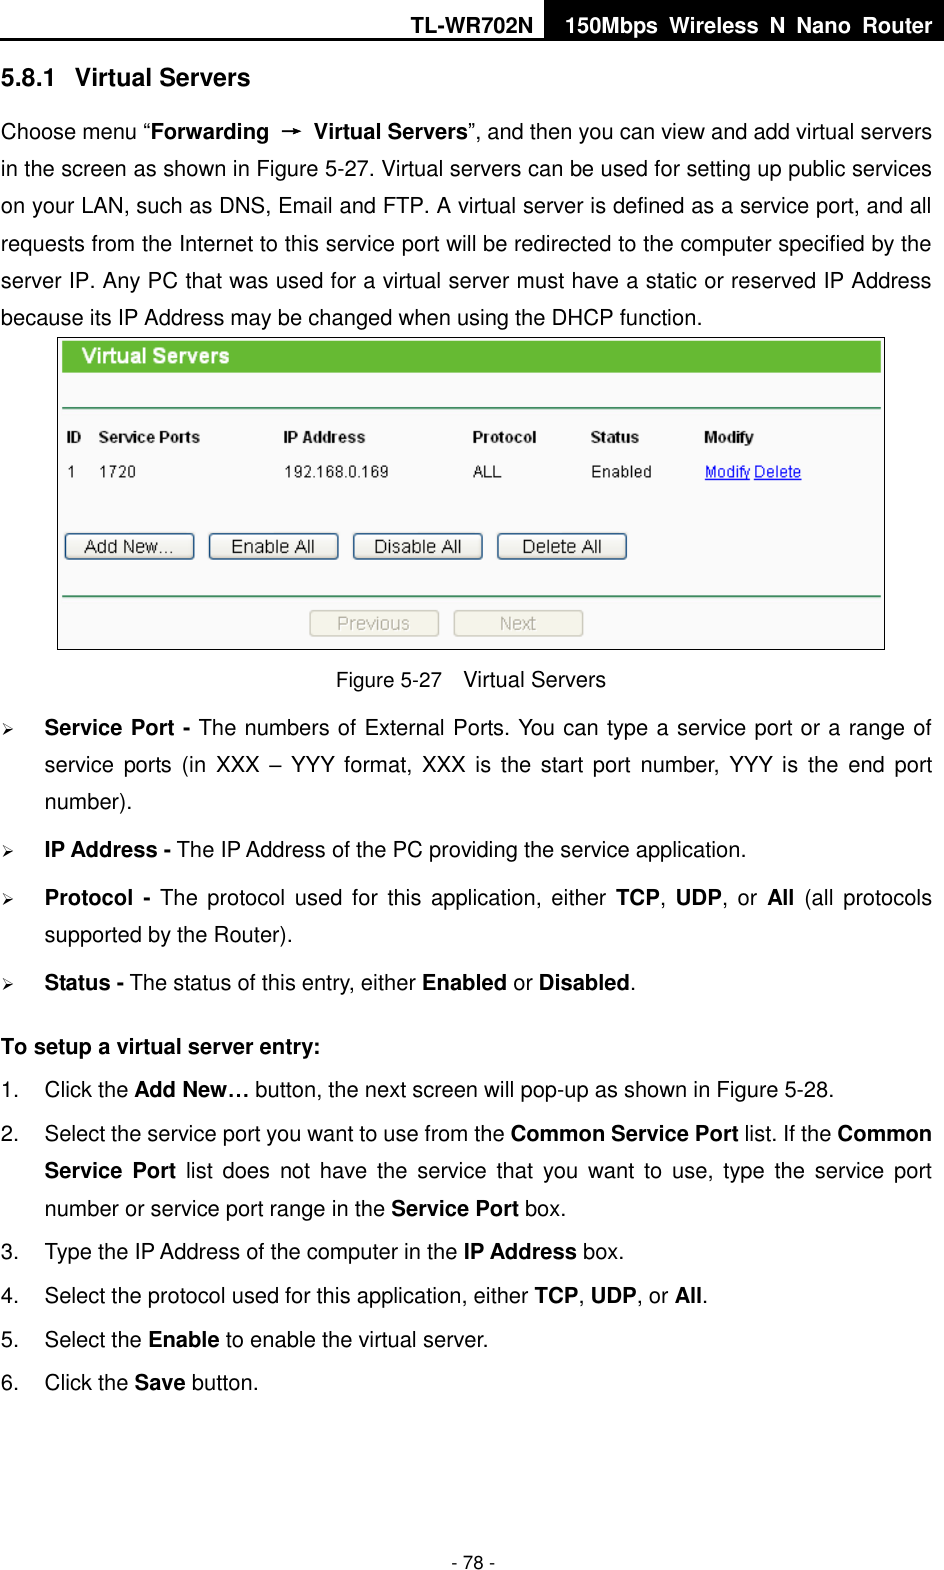 TL-WR702N 150Mbps  Wireless  N  Nano  Router  - 78 - 5.8.1  Virtual Servers Choose menu “Forwarding  →  Virtual Servers”, and then you can view and add virtual servers in the screen as shown in Figure 5-27. Virtual servers can be used for setting up public services on your LAN, such as DNS, Email and FTP. A virtual server is defined as a service port, and all requests from the Internet to this service port will be redirected to the computer specified by the server IP. Any PC that was used for a virtual server must have a static or reserved IP Address because its IP Address may be changed when using the DHCP function.    Figure 5-27  Virtual Servers  Service Port - The numbers of External Ports. You can type a service port or a range of service  ports (in XXX  –  YYY format, XXX  is  the  start  port  number,  YYY  is  the  end  port number).    IP Address - The IP Address of the PC providing the service application.  Protocol - The  protocol used for this  application, either  TCP,  UDP, or  All (all protocols supported by the Router).  Status - The status of this entry, either Enabled or Disabled. To setup a virtual server entry:   1.  Click the Add New… button, the next screen will pop-up as shown in Figure 5-28. 2.  Select the service port you want to use from the Common Service Port list. If the Common Service Port list  does  not  have the service  that  you  want  to  use,  type  the  service  port number or service port range in the Service Port box. 3.  Type the IP Address of the computer in the IP Address box.   4.  Select the protocol used for this application, either TCP, UDP, or All. 5.  Select the Enable to enable the virtual server. 6.  Click the Save button.   